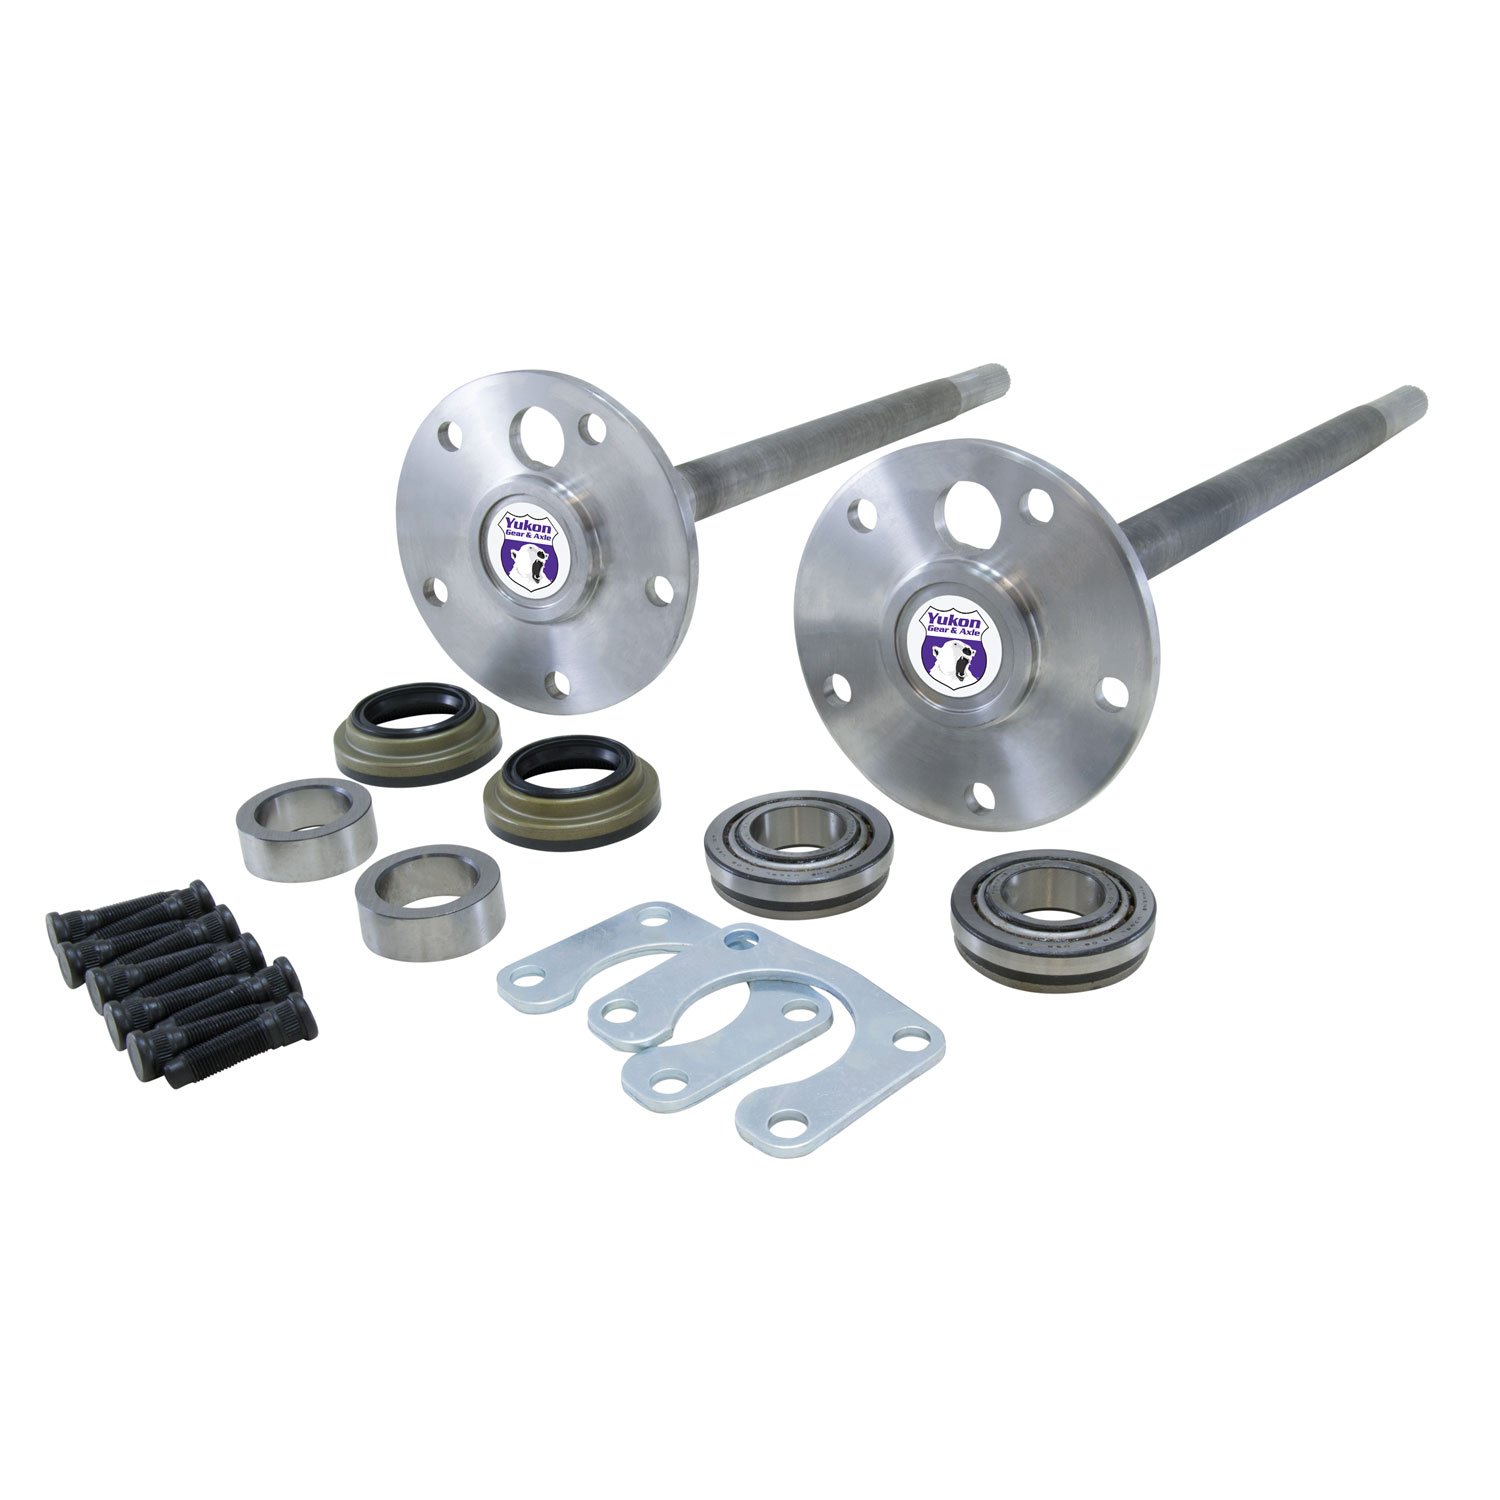 1541H Alloy Rear Axle Kit For Ford 9 in. Bronco From '66-'75 With 35 Splines